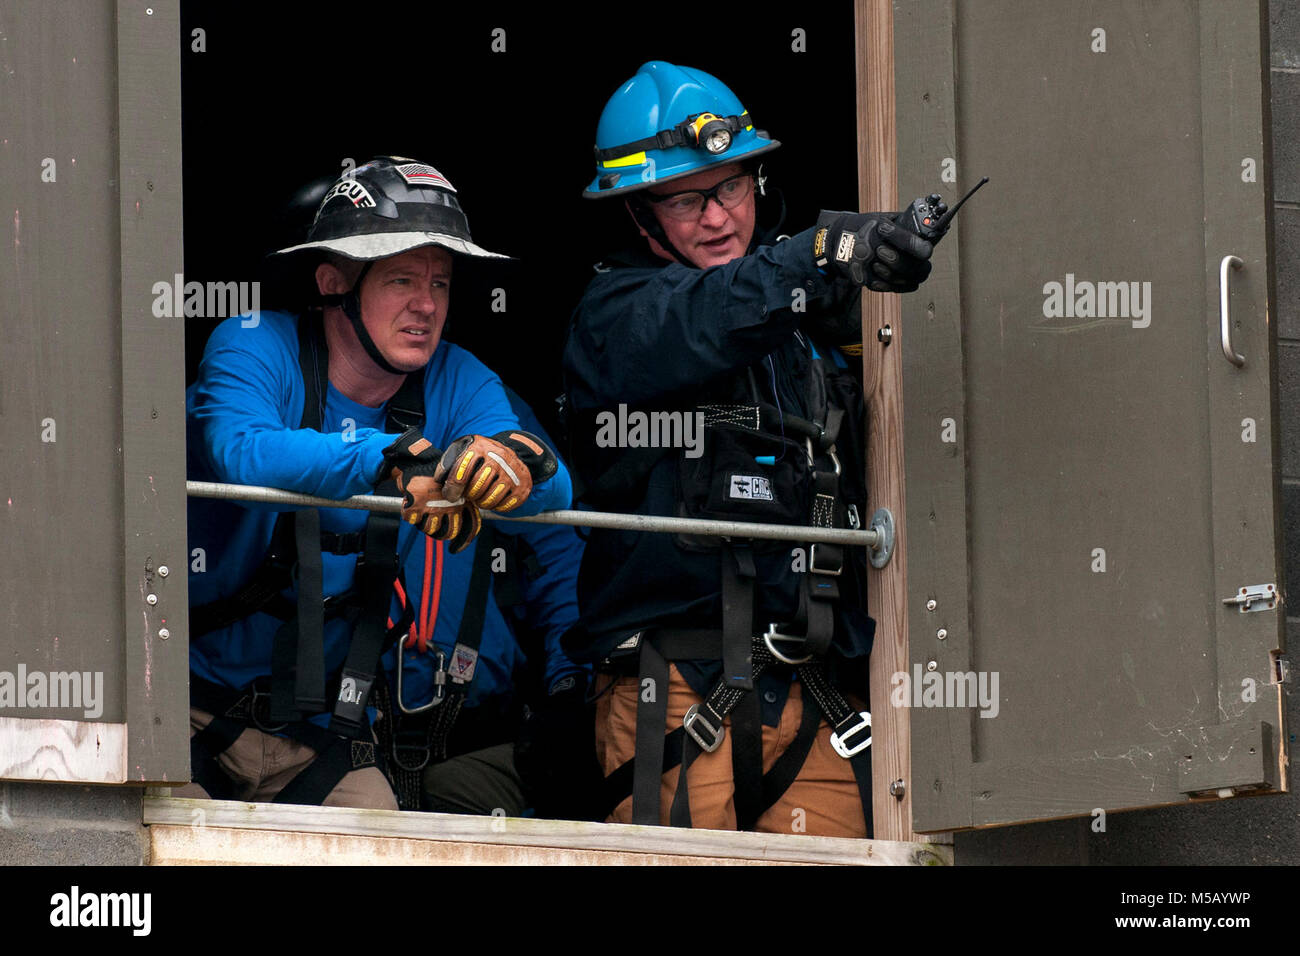 Members of the Mississippi Task Force Urban Search and Rescue Team simulate responding to victims in a collapsed structure during the PATRIOT South 2018 exercise at Camp Shelby, Miss., Feb. 14, 2018. PATRIOT South 2018 tests the combined abilities of the National Guard, along with state and local agencies, to respond during natural disasters using simulated emergency scenarios. (U.S. Air National Guard Stock Photo